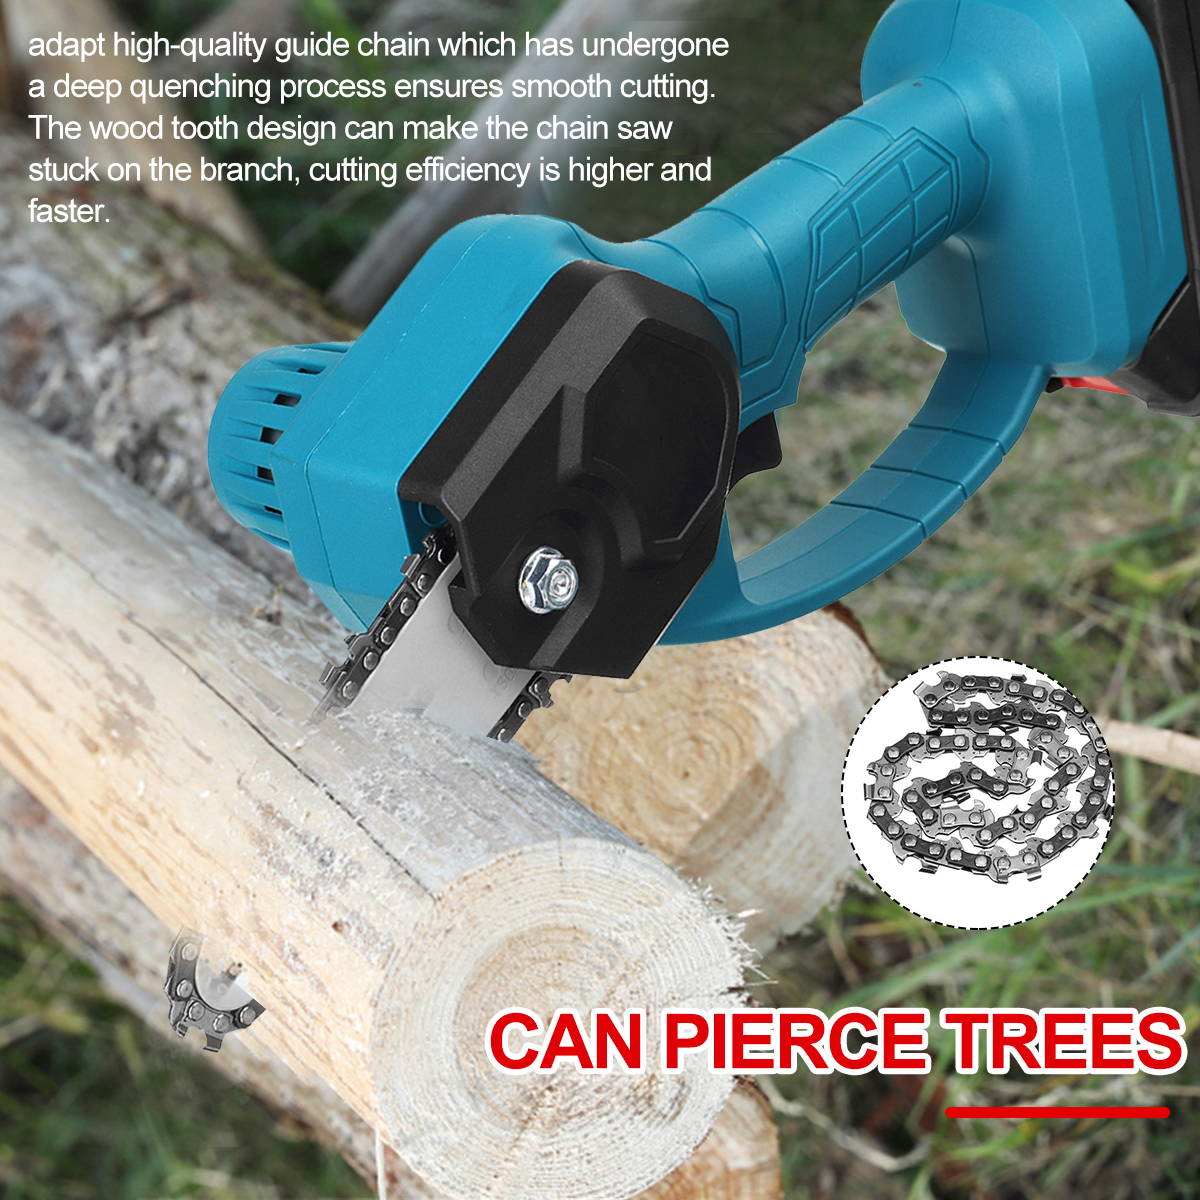 4-Inch-24V-Cordless-Electric-Chainsaw-Protable-Tree-Branch-Wood-Cutting-Saw-W-01pc2pcs-Batteries-1803311-4